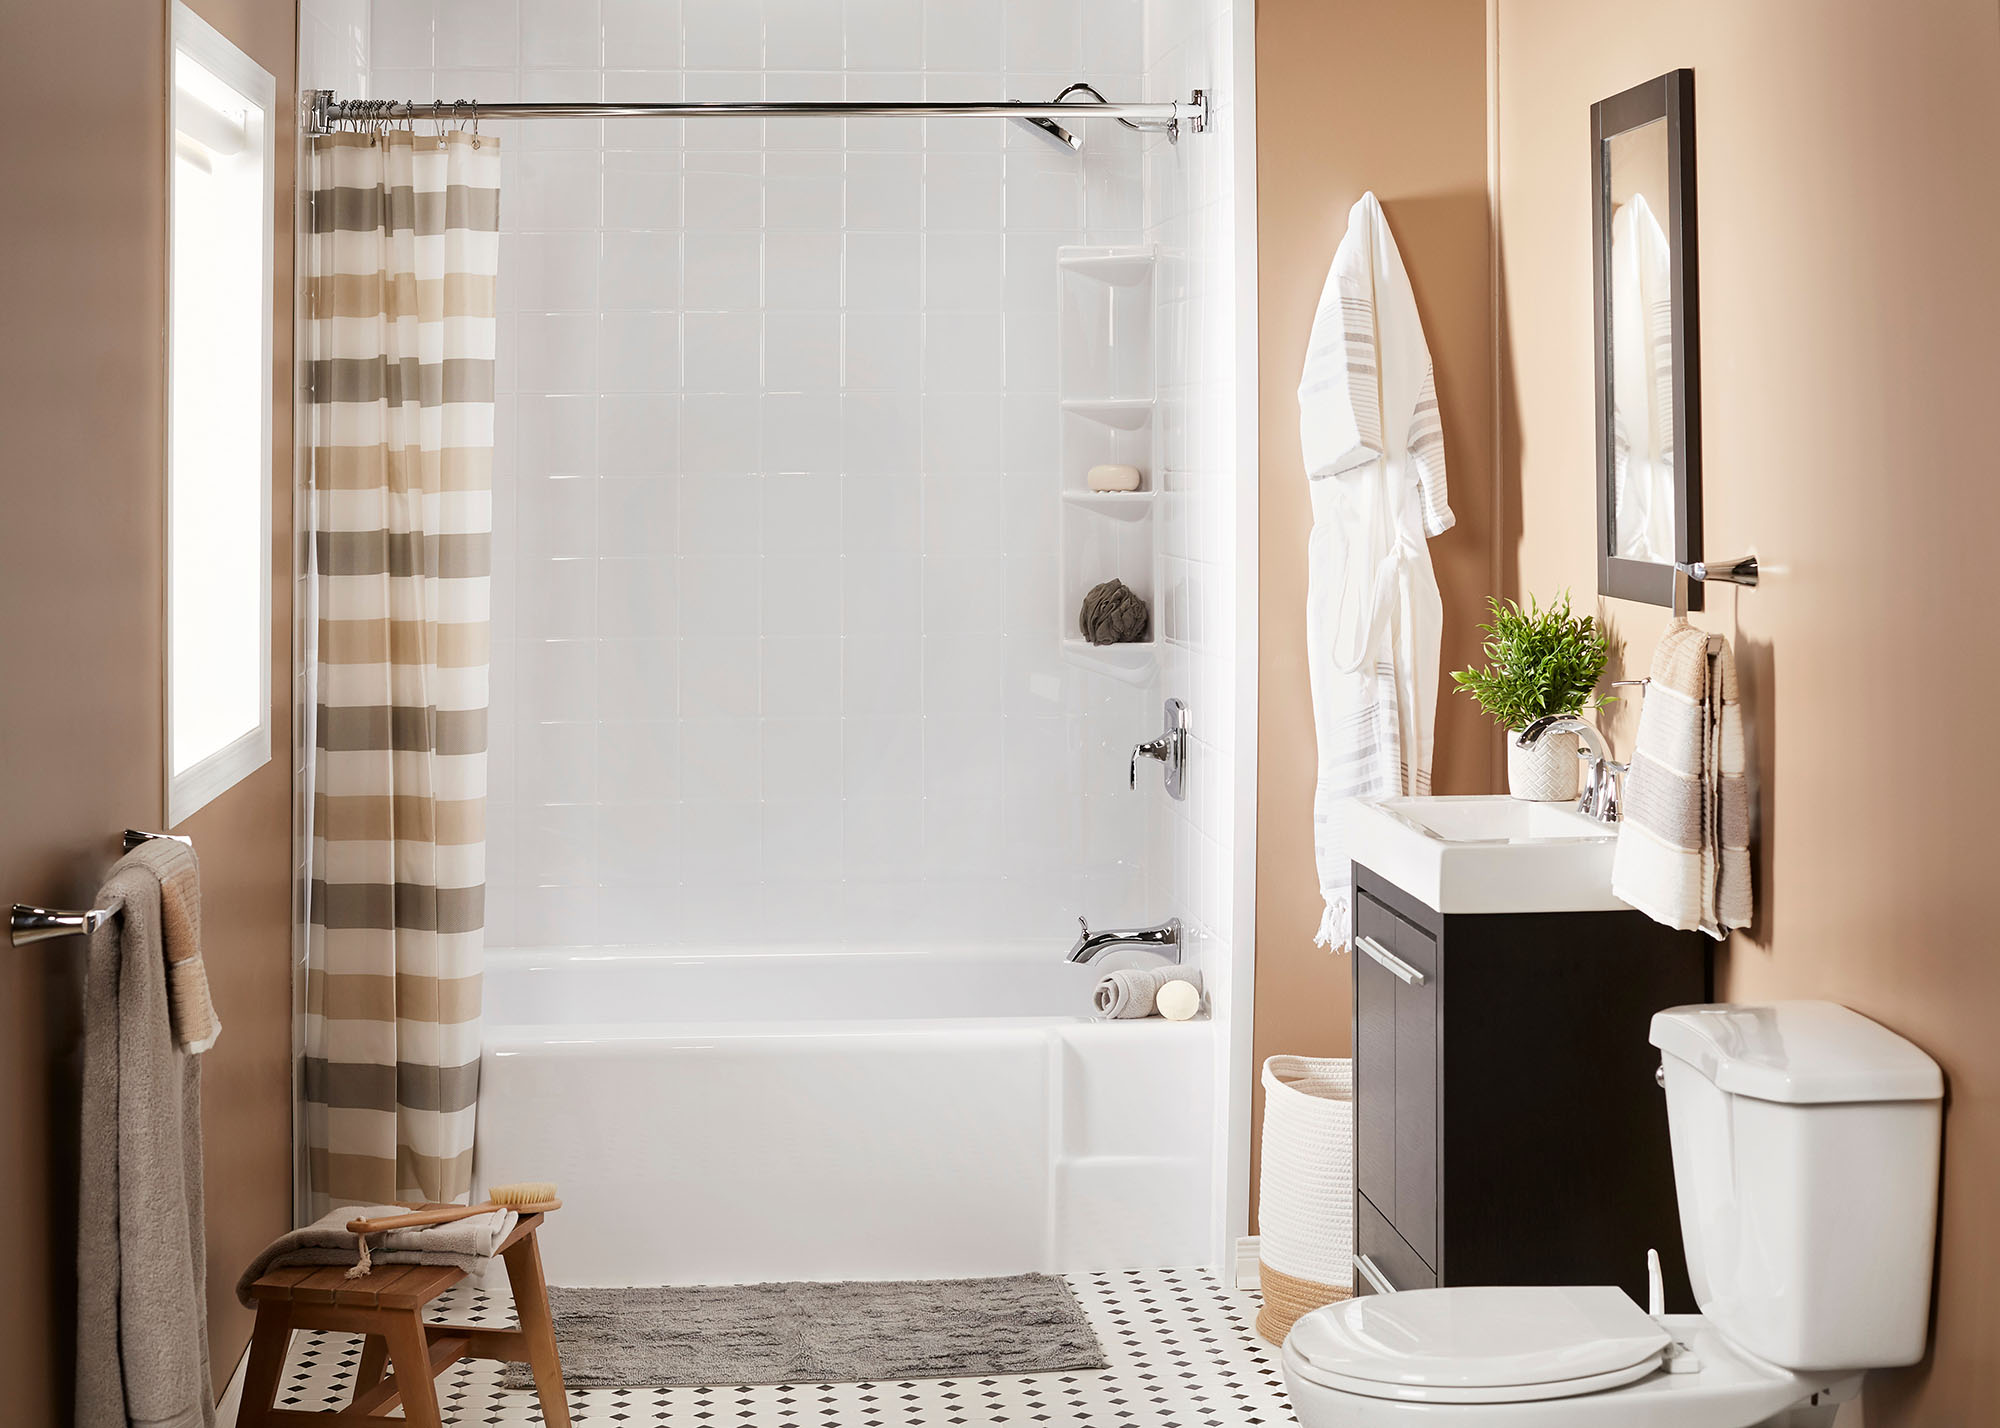 Hacks to make the most of your tiny bathroom